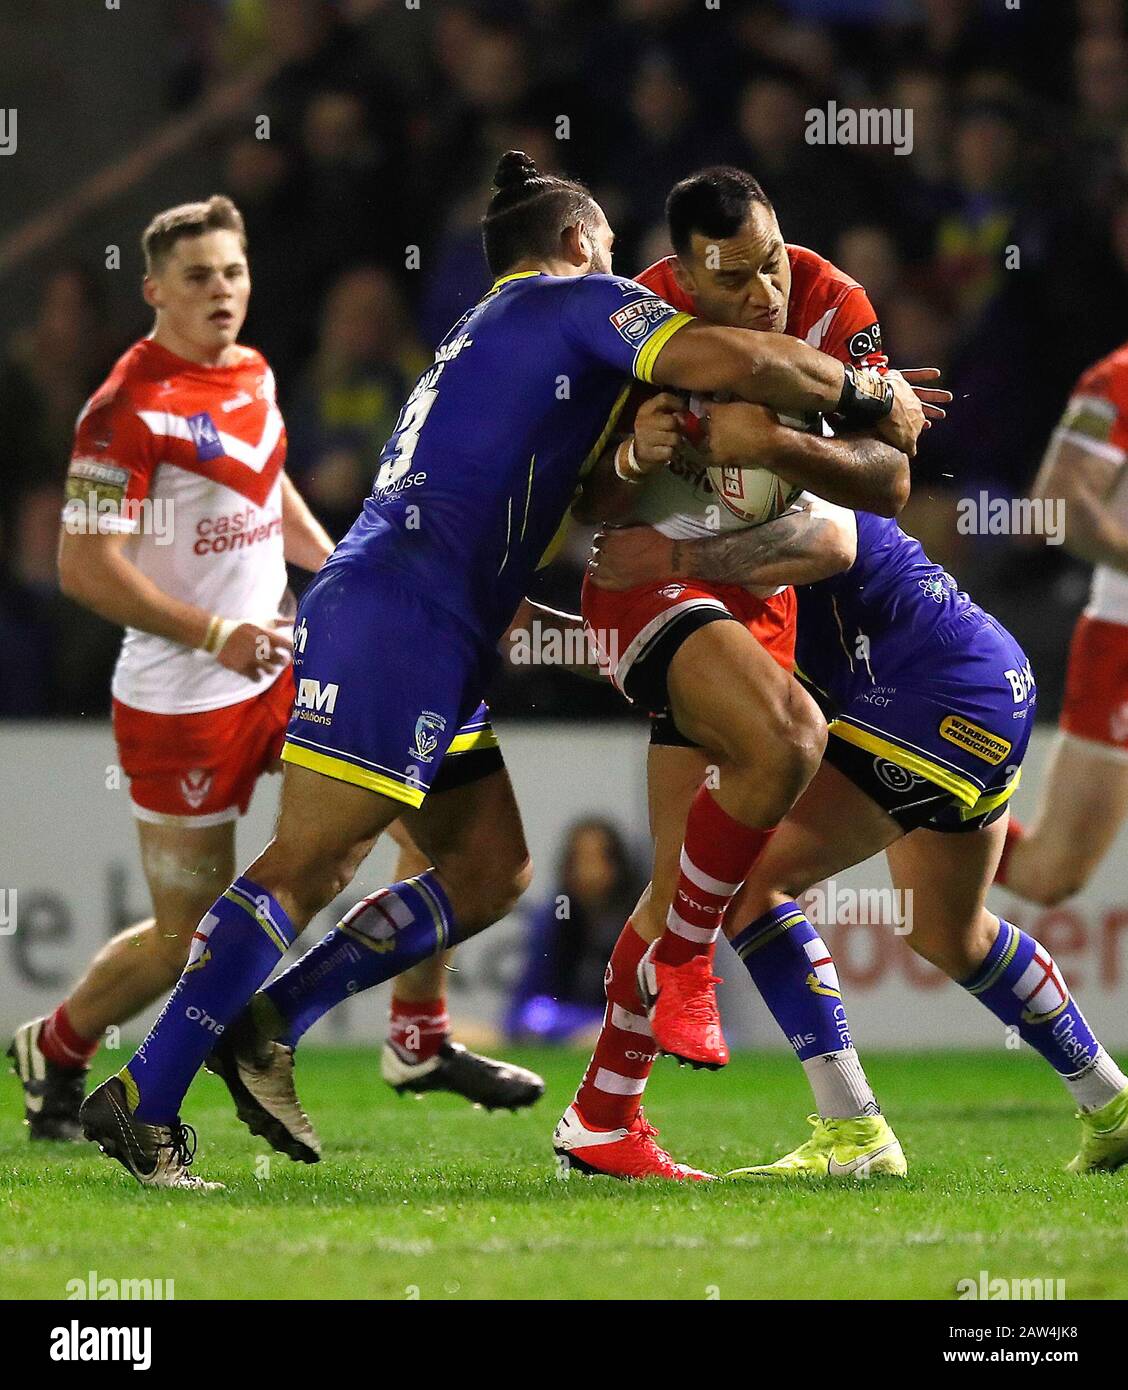 St Helens Saints' Zeb Taia is tackled by Warrington Wolves' Ben Murdock-Masila (left) and Blake Austin (right) during the Betfred Super League match at The Halliwell Jones stadium, Warrington. Stock Photo